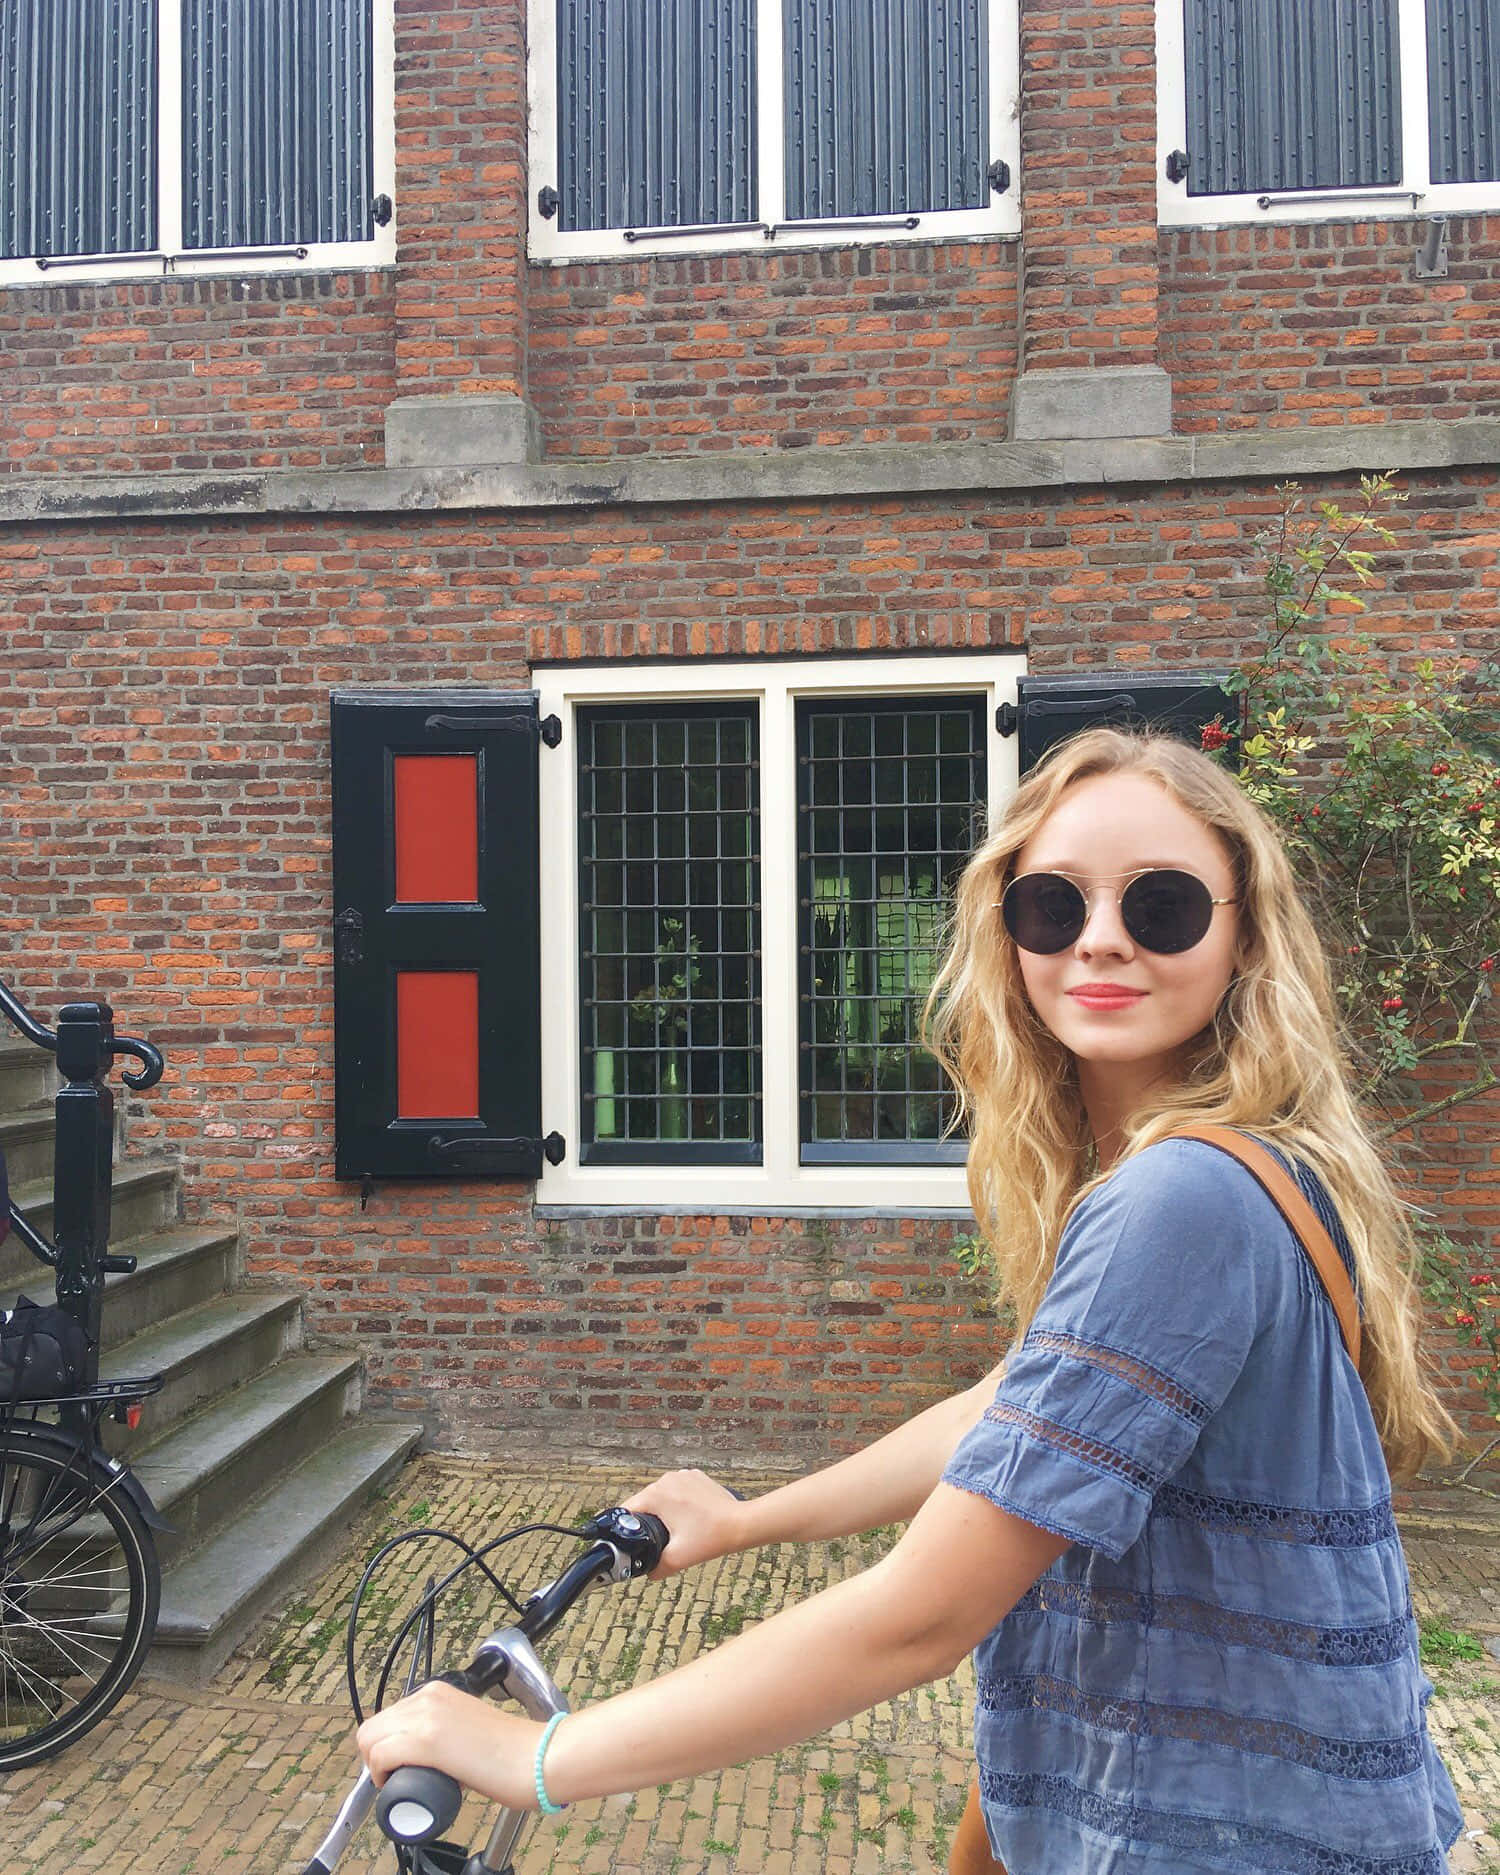 Womanwith Bicycle Near Brick Building Wallpaper